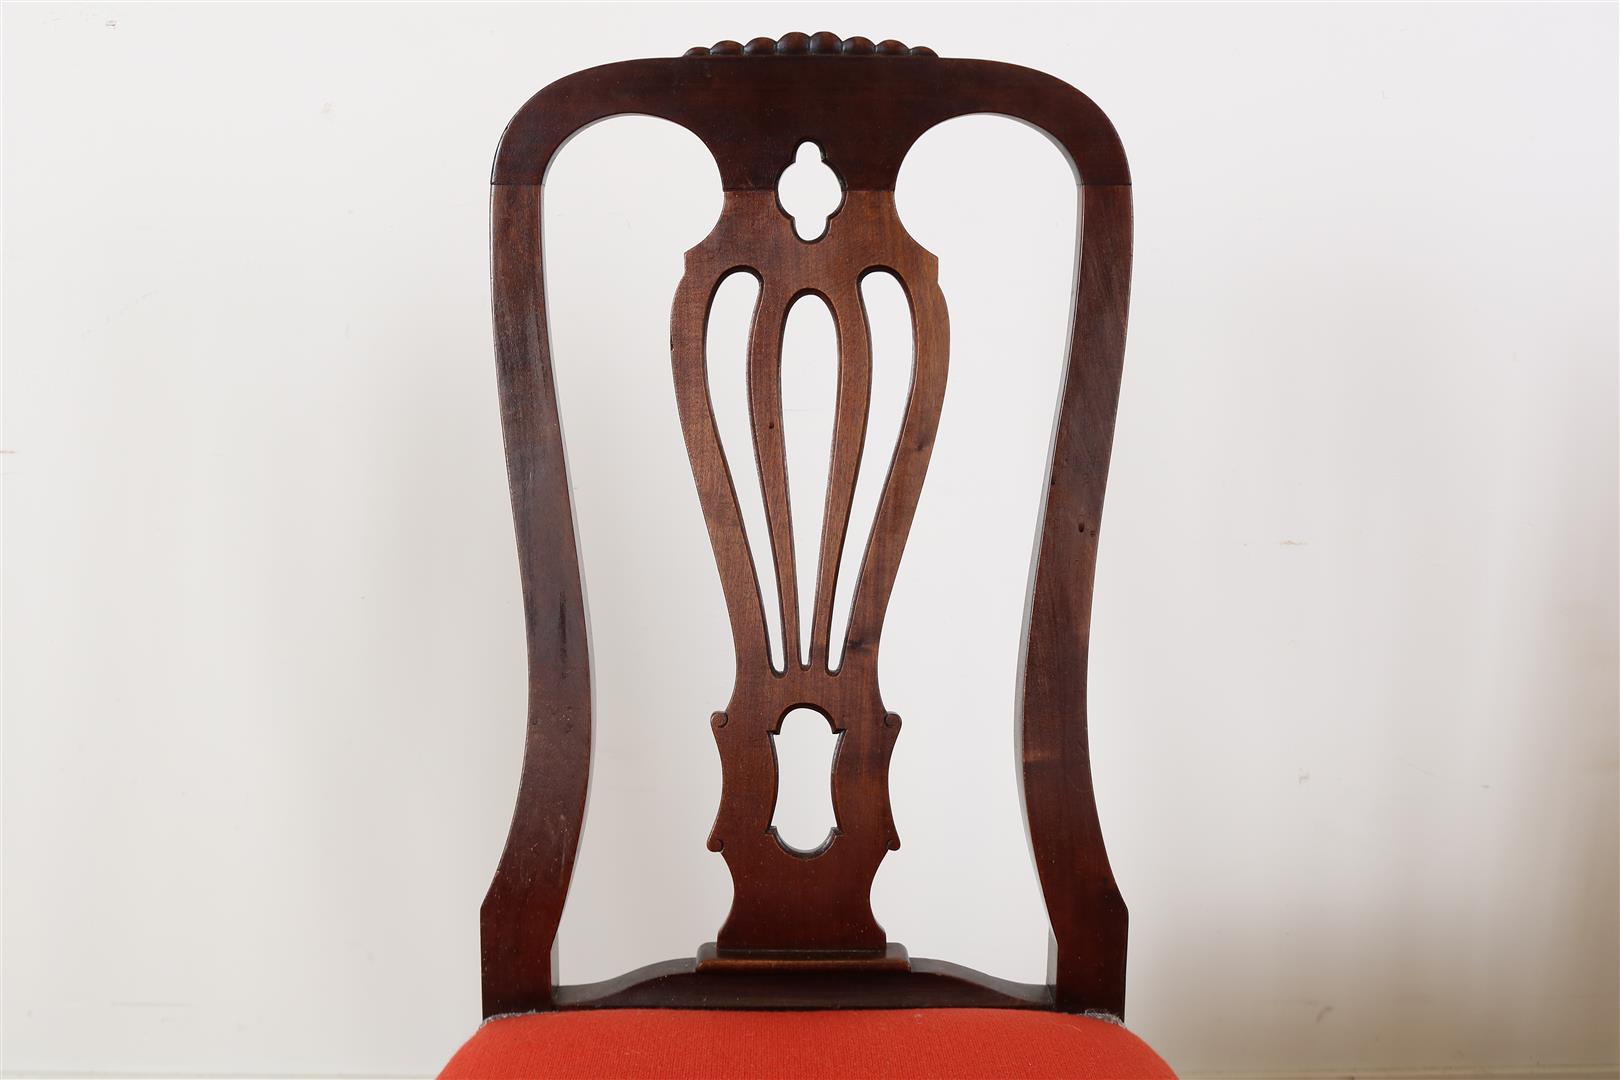 Series of 4 Chippendale-style chairs with elaborate backrest, red fabric seat on ball claw feet, - Image 2 of 4